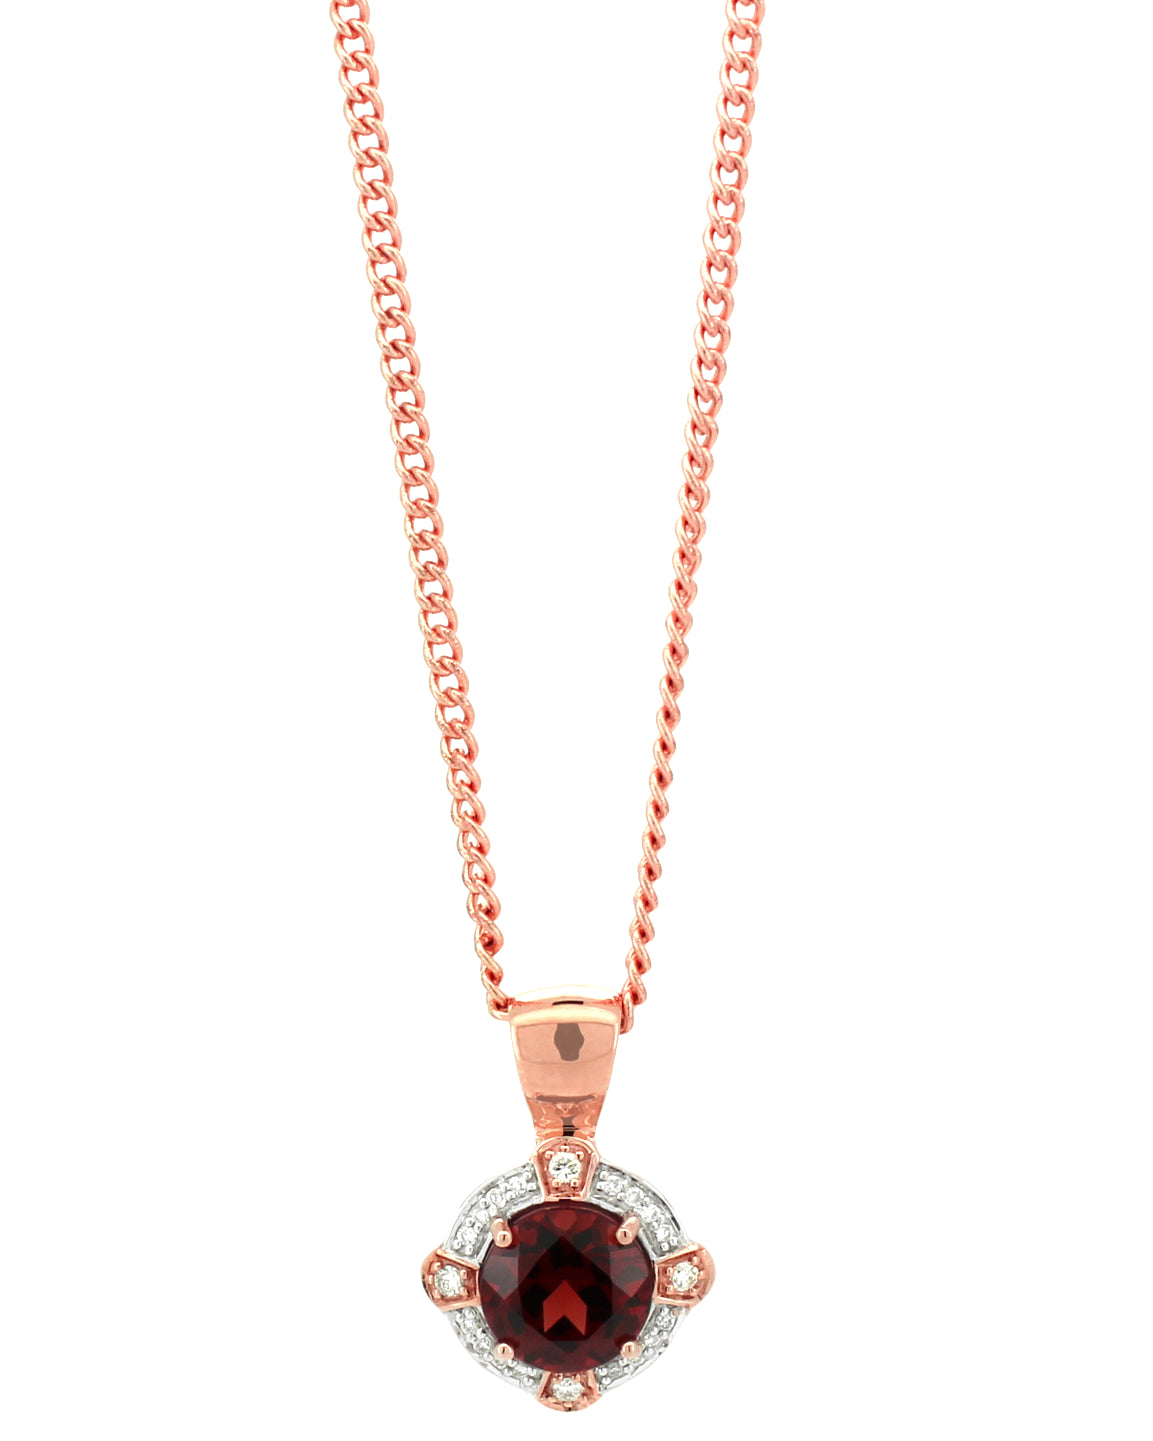 9CT ROSE GOLD PENDANT WITH D4-SI3 DIAMOND AND GARNET